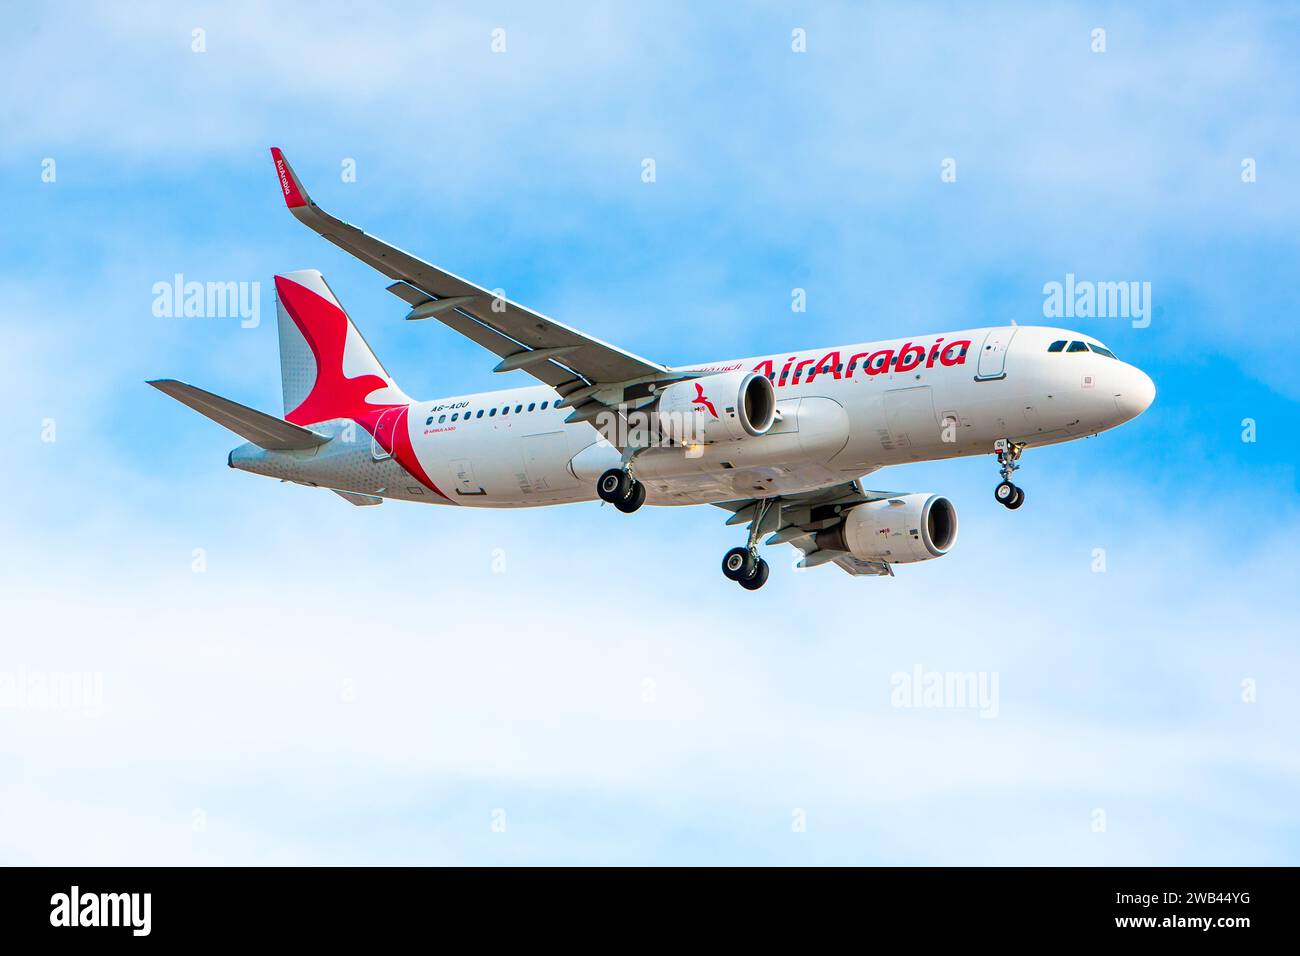 Boryspil, Ukraine - February 10, 2020: Airplane Airbus A320 (A6-AOU) of Air Arabia is landing at Boryspil International Airport Stock Photo